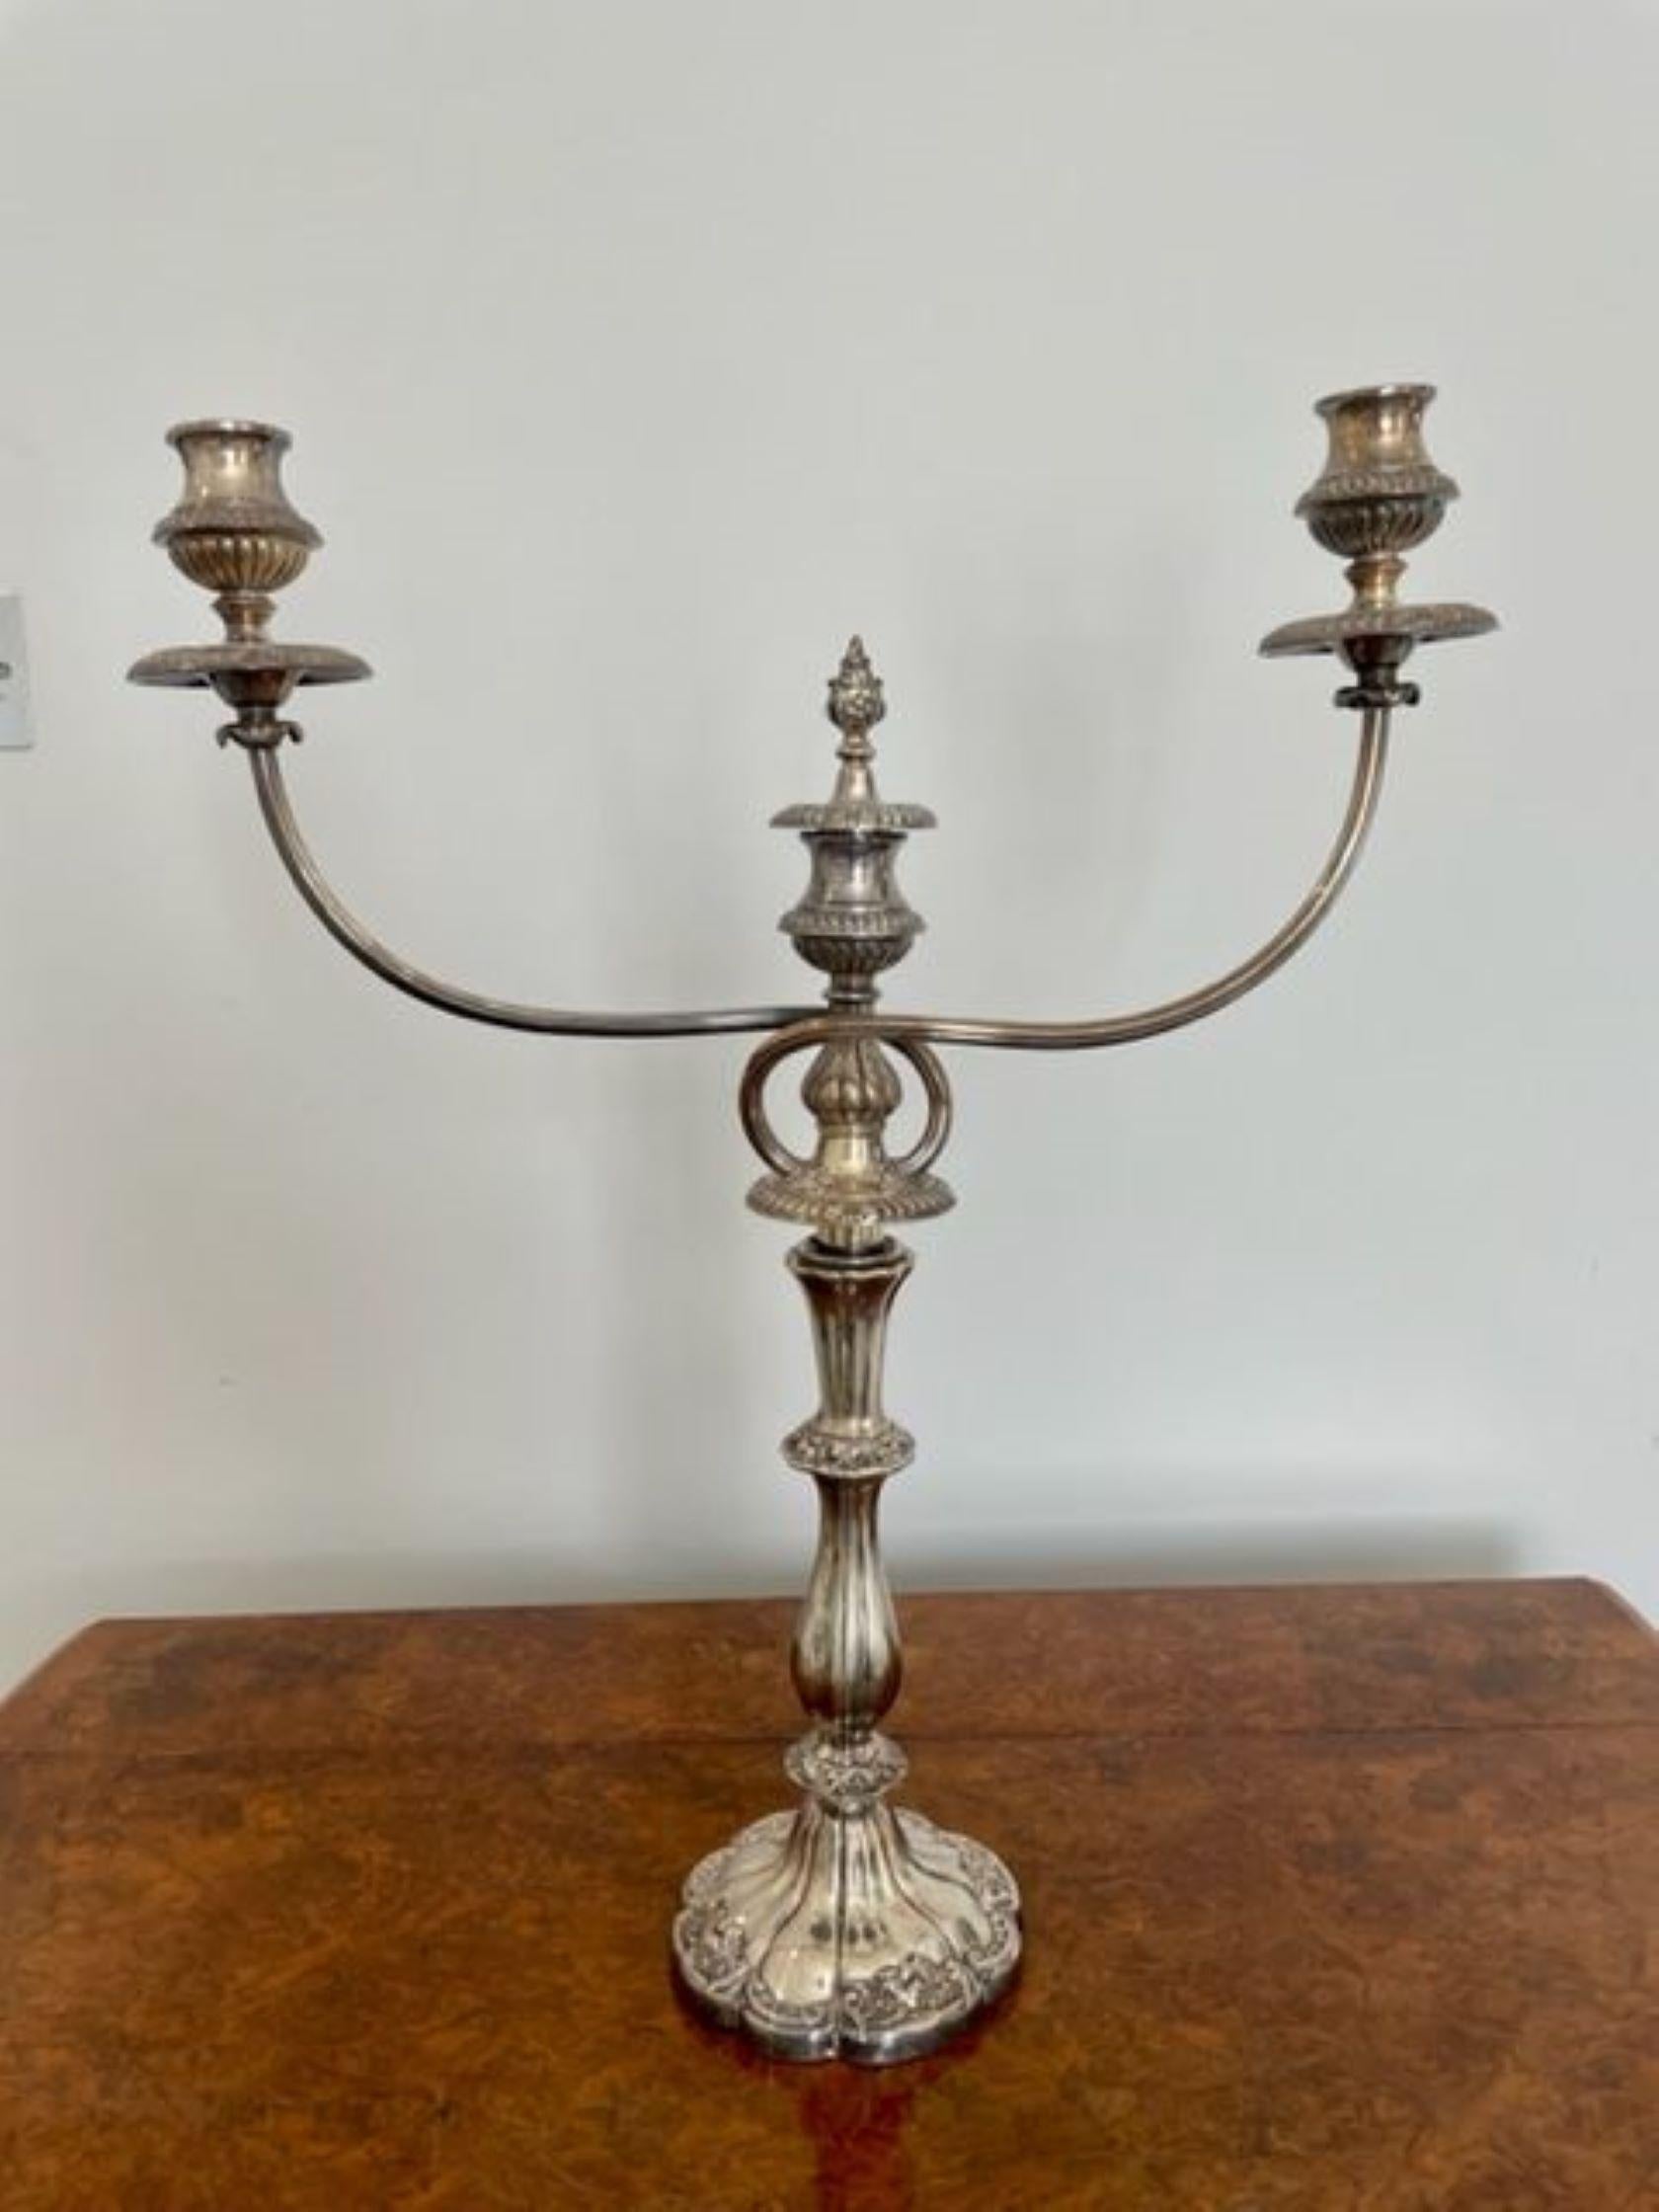 Fine quality antique Victorian silver plated candelabra having a quality ornate base and a shaped reeded column with a two branch candelabra with a center candle holder with a removable finale.